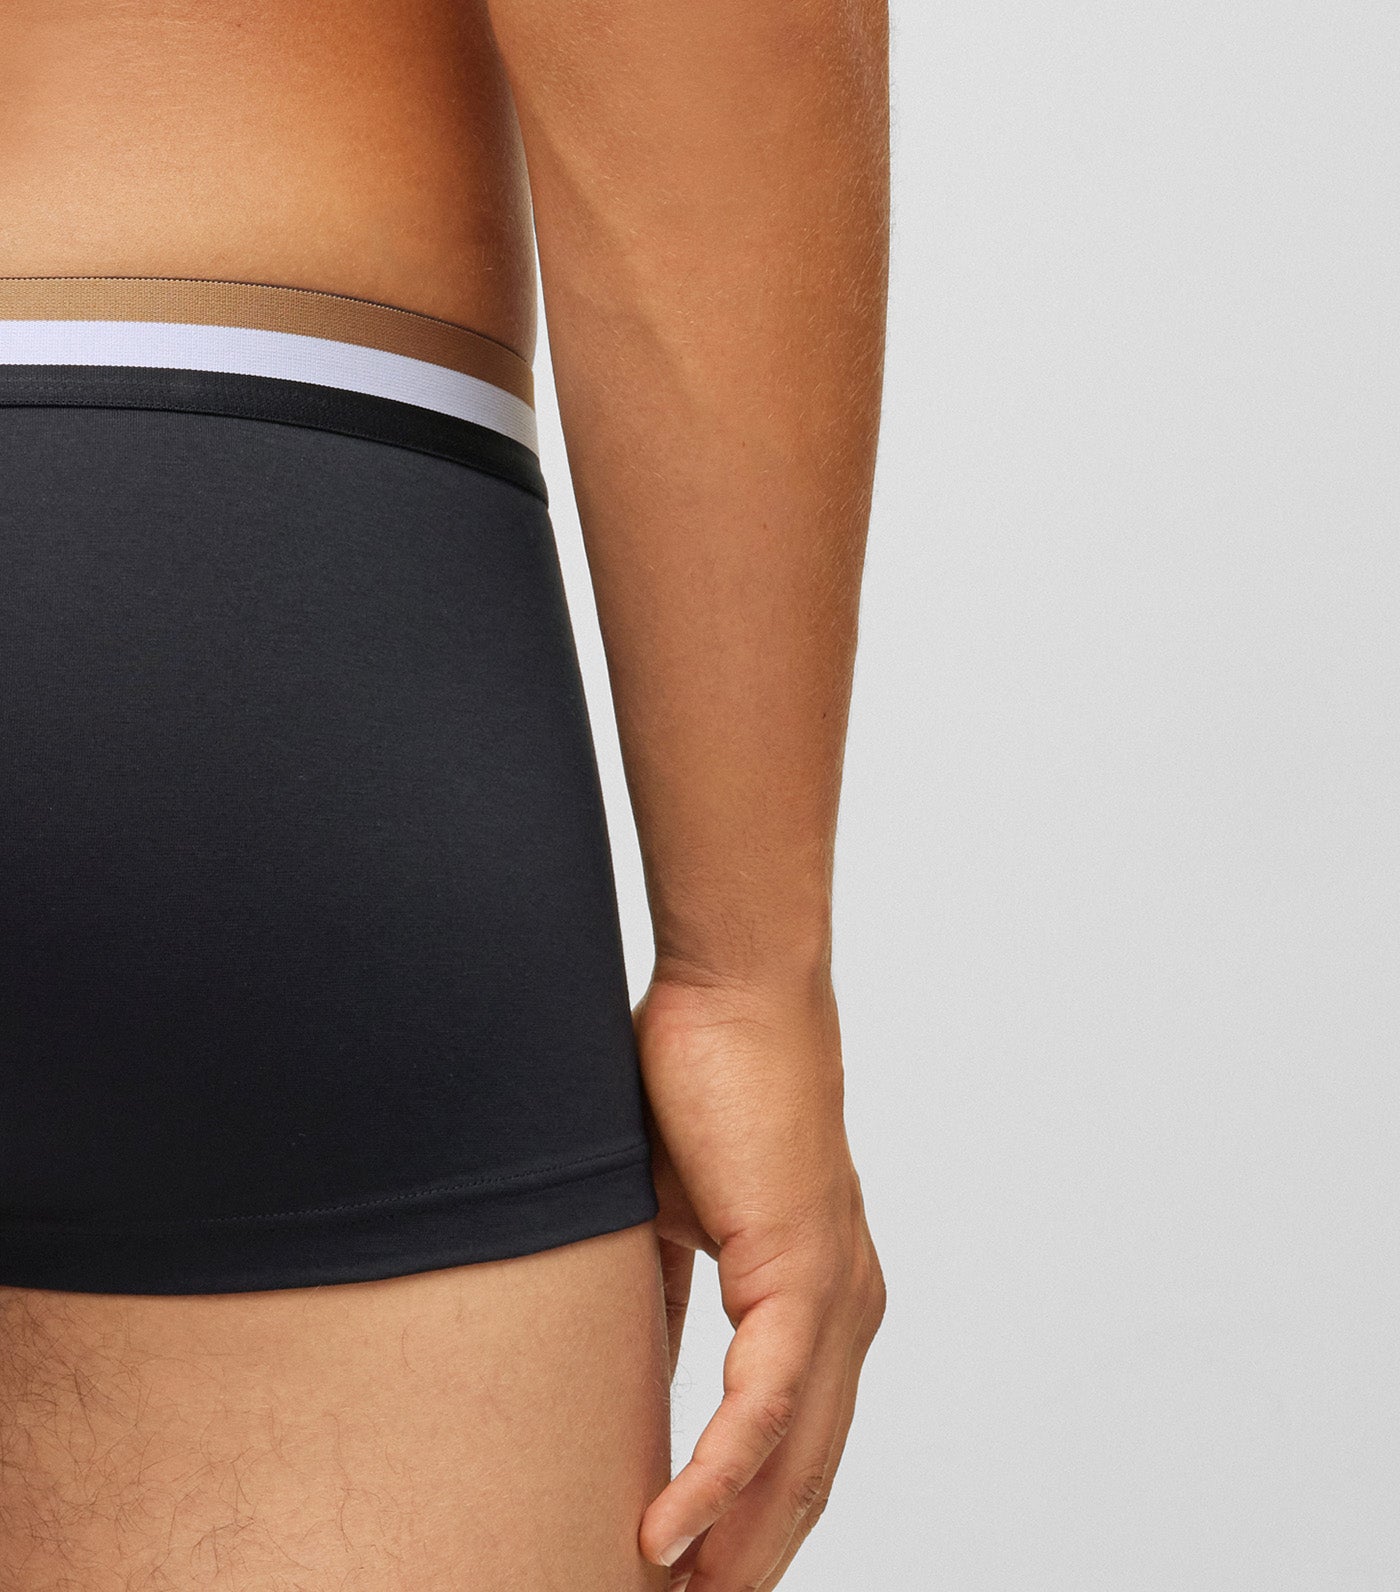 Cotton-Blend Trunks with Signature-Stripe Waistband